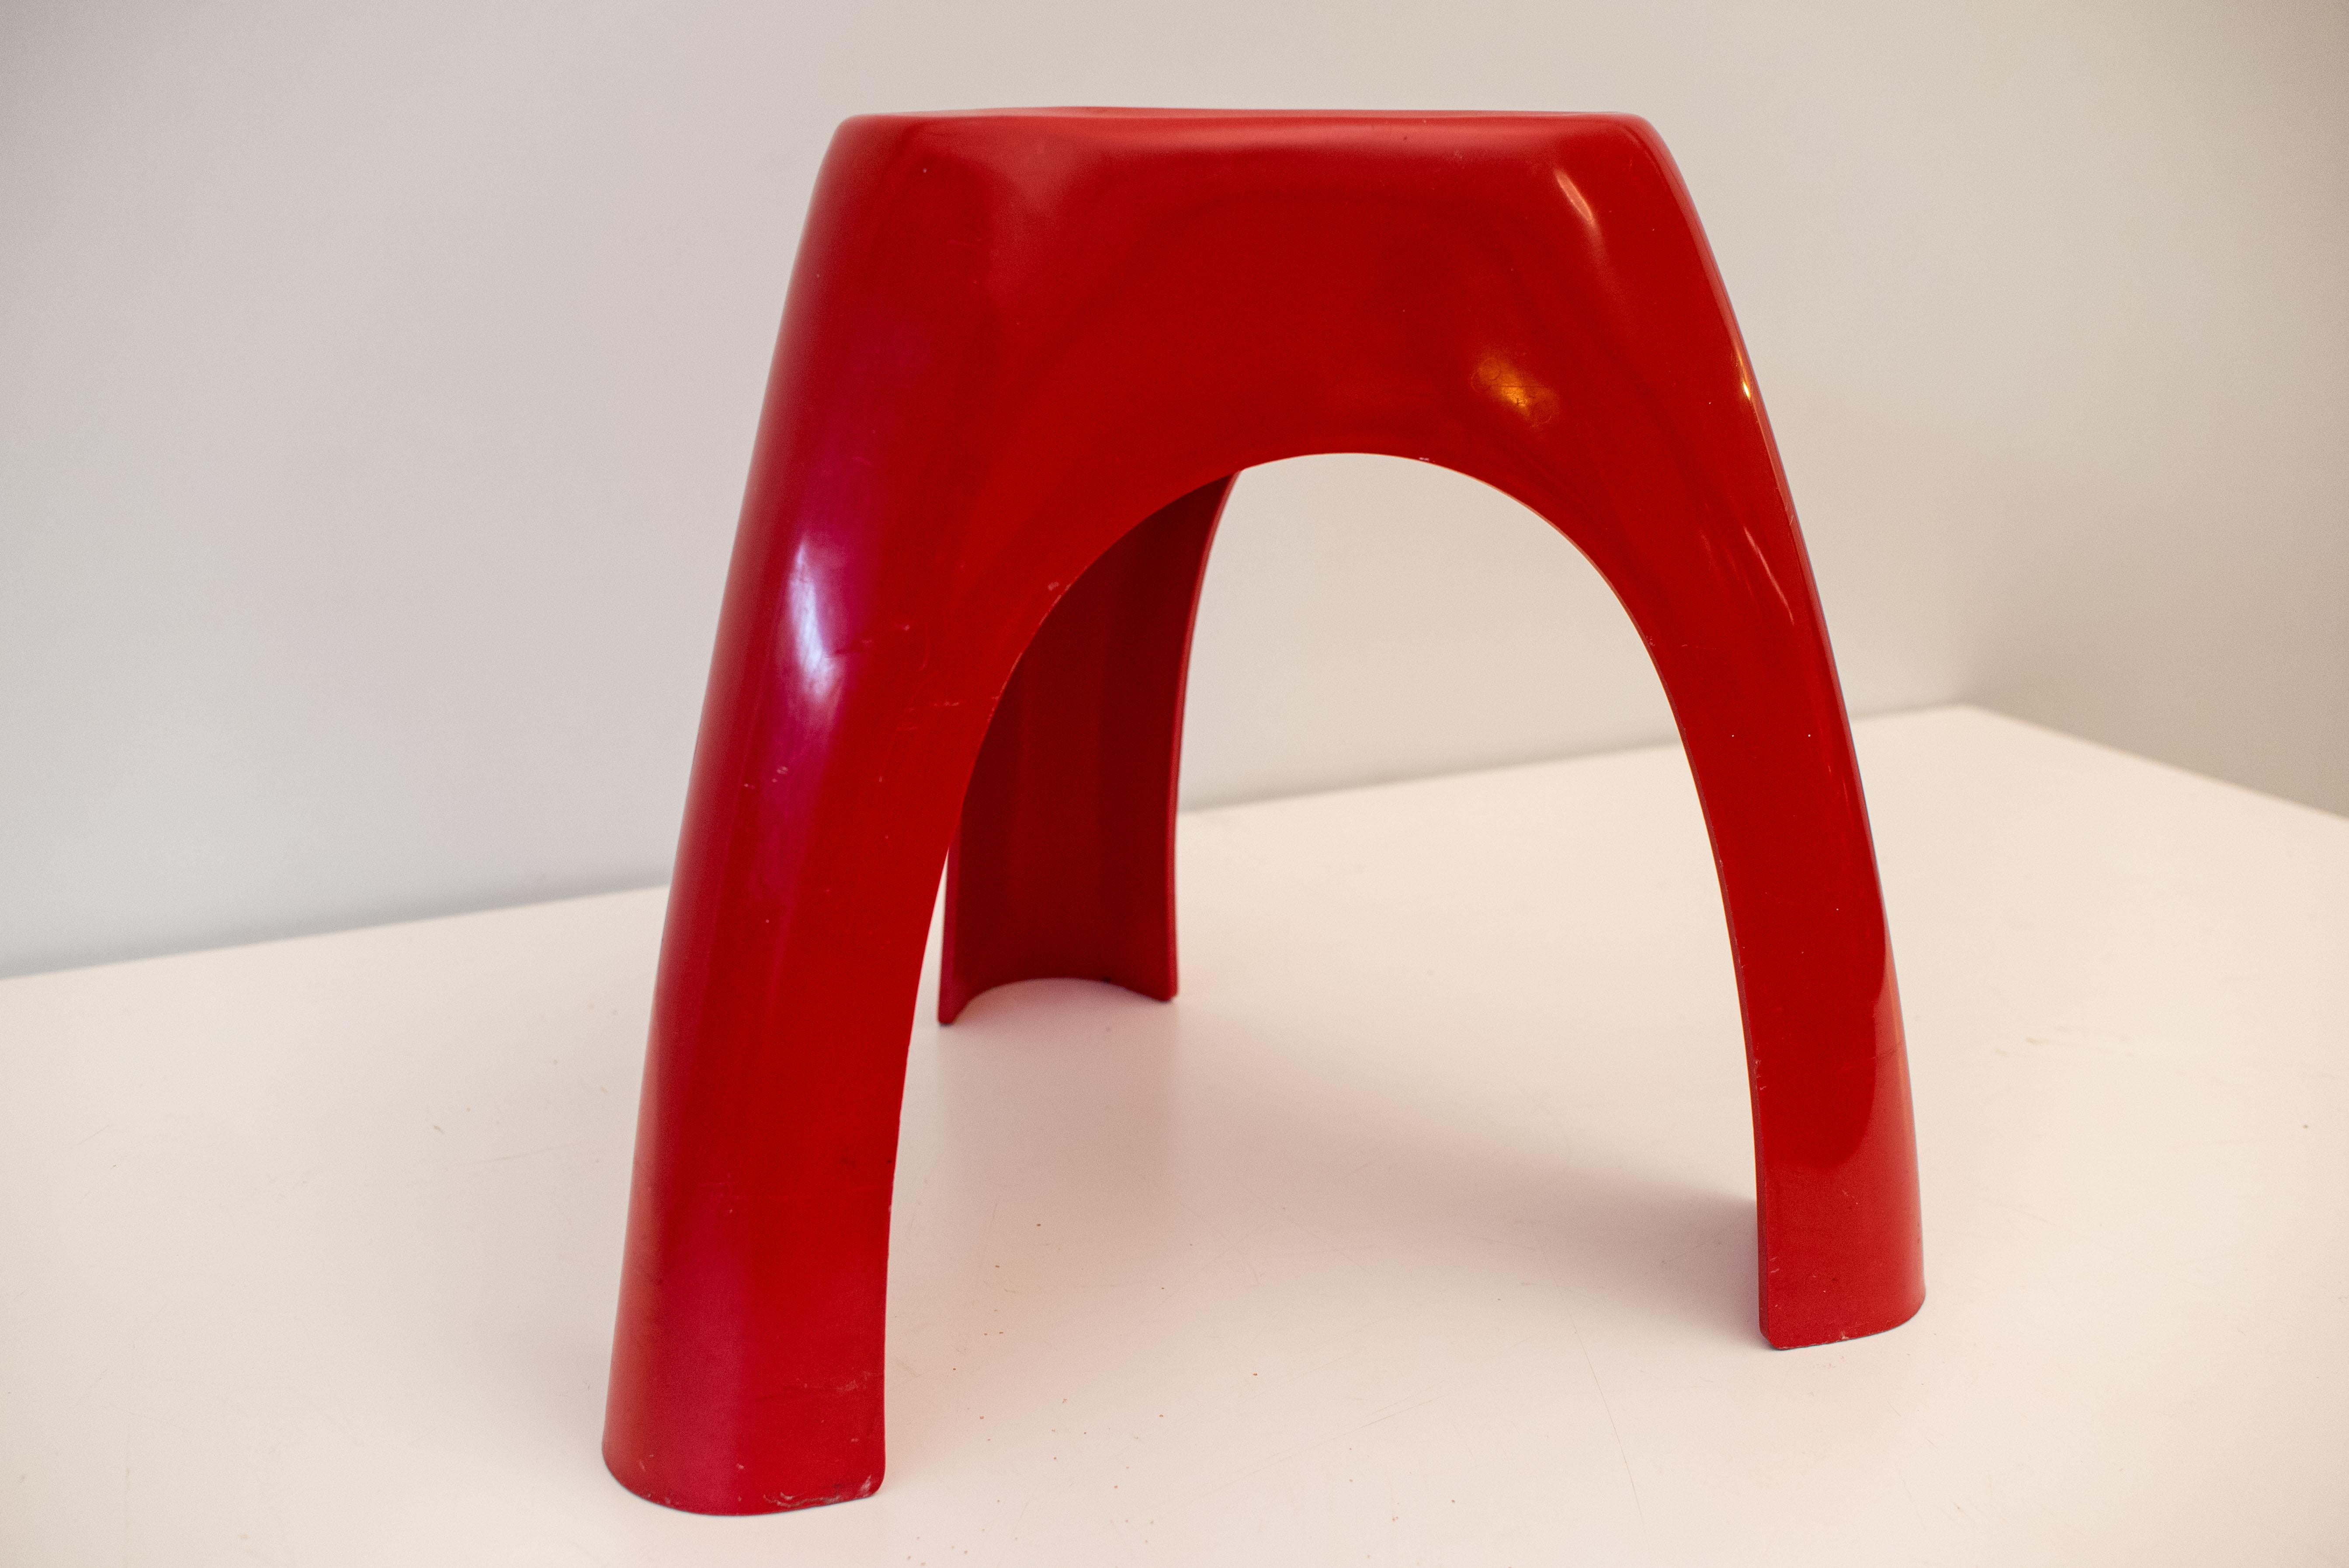 The model elephant stool is one of the most well-known examples of Japanese post-war design with a clear form and functionality. Suited for indoor spaces as well as balconies and gardens, the stackable plastic stool can also be used as portable